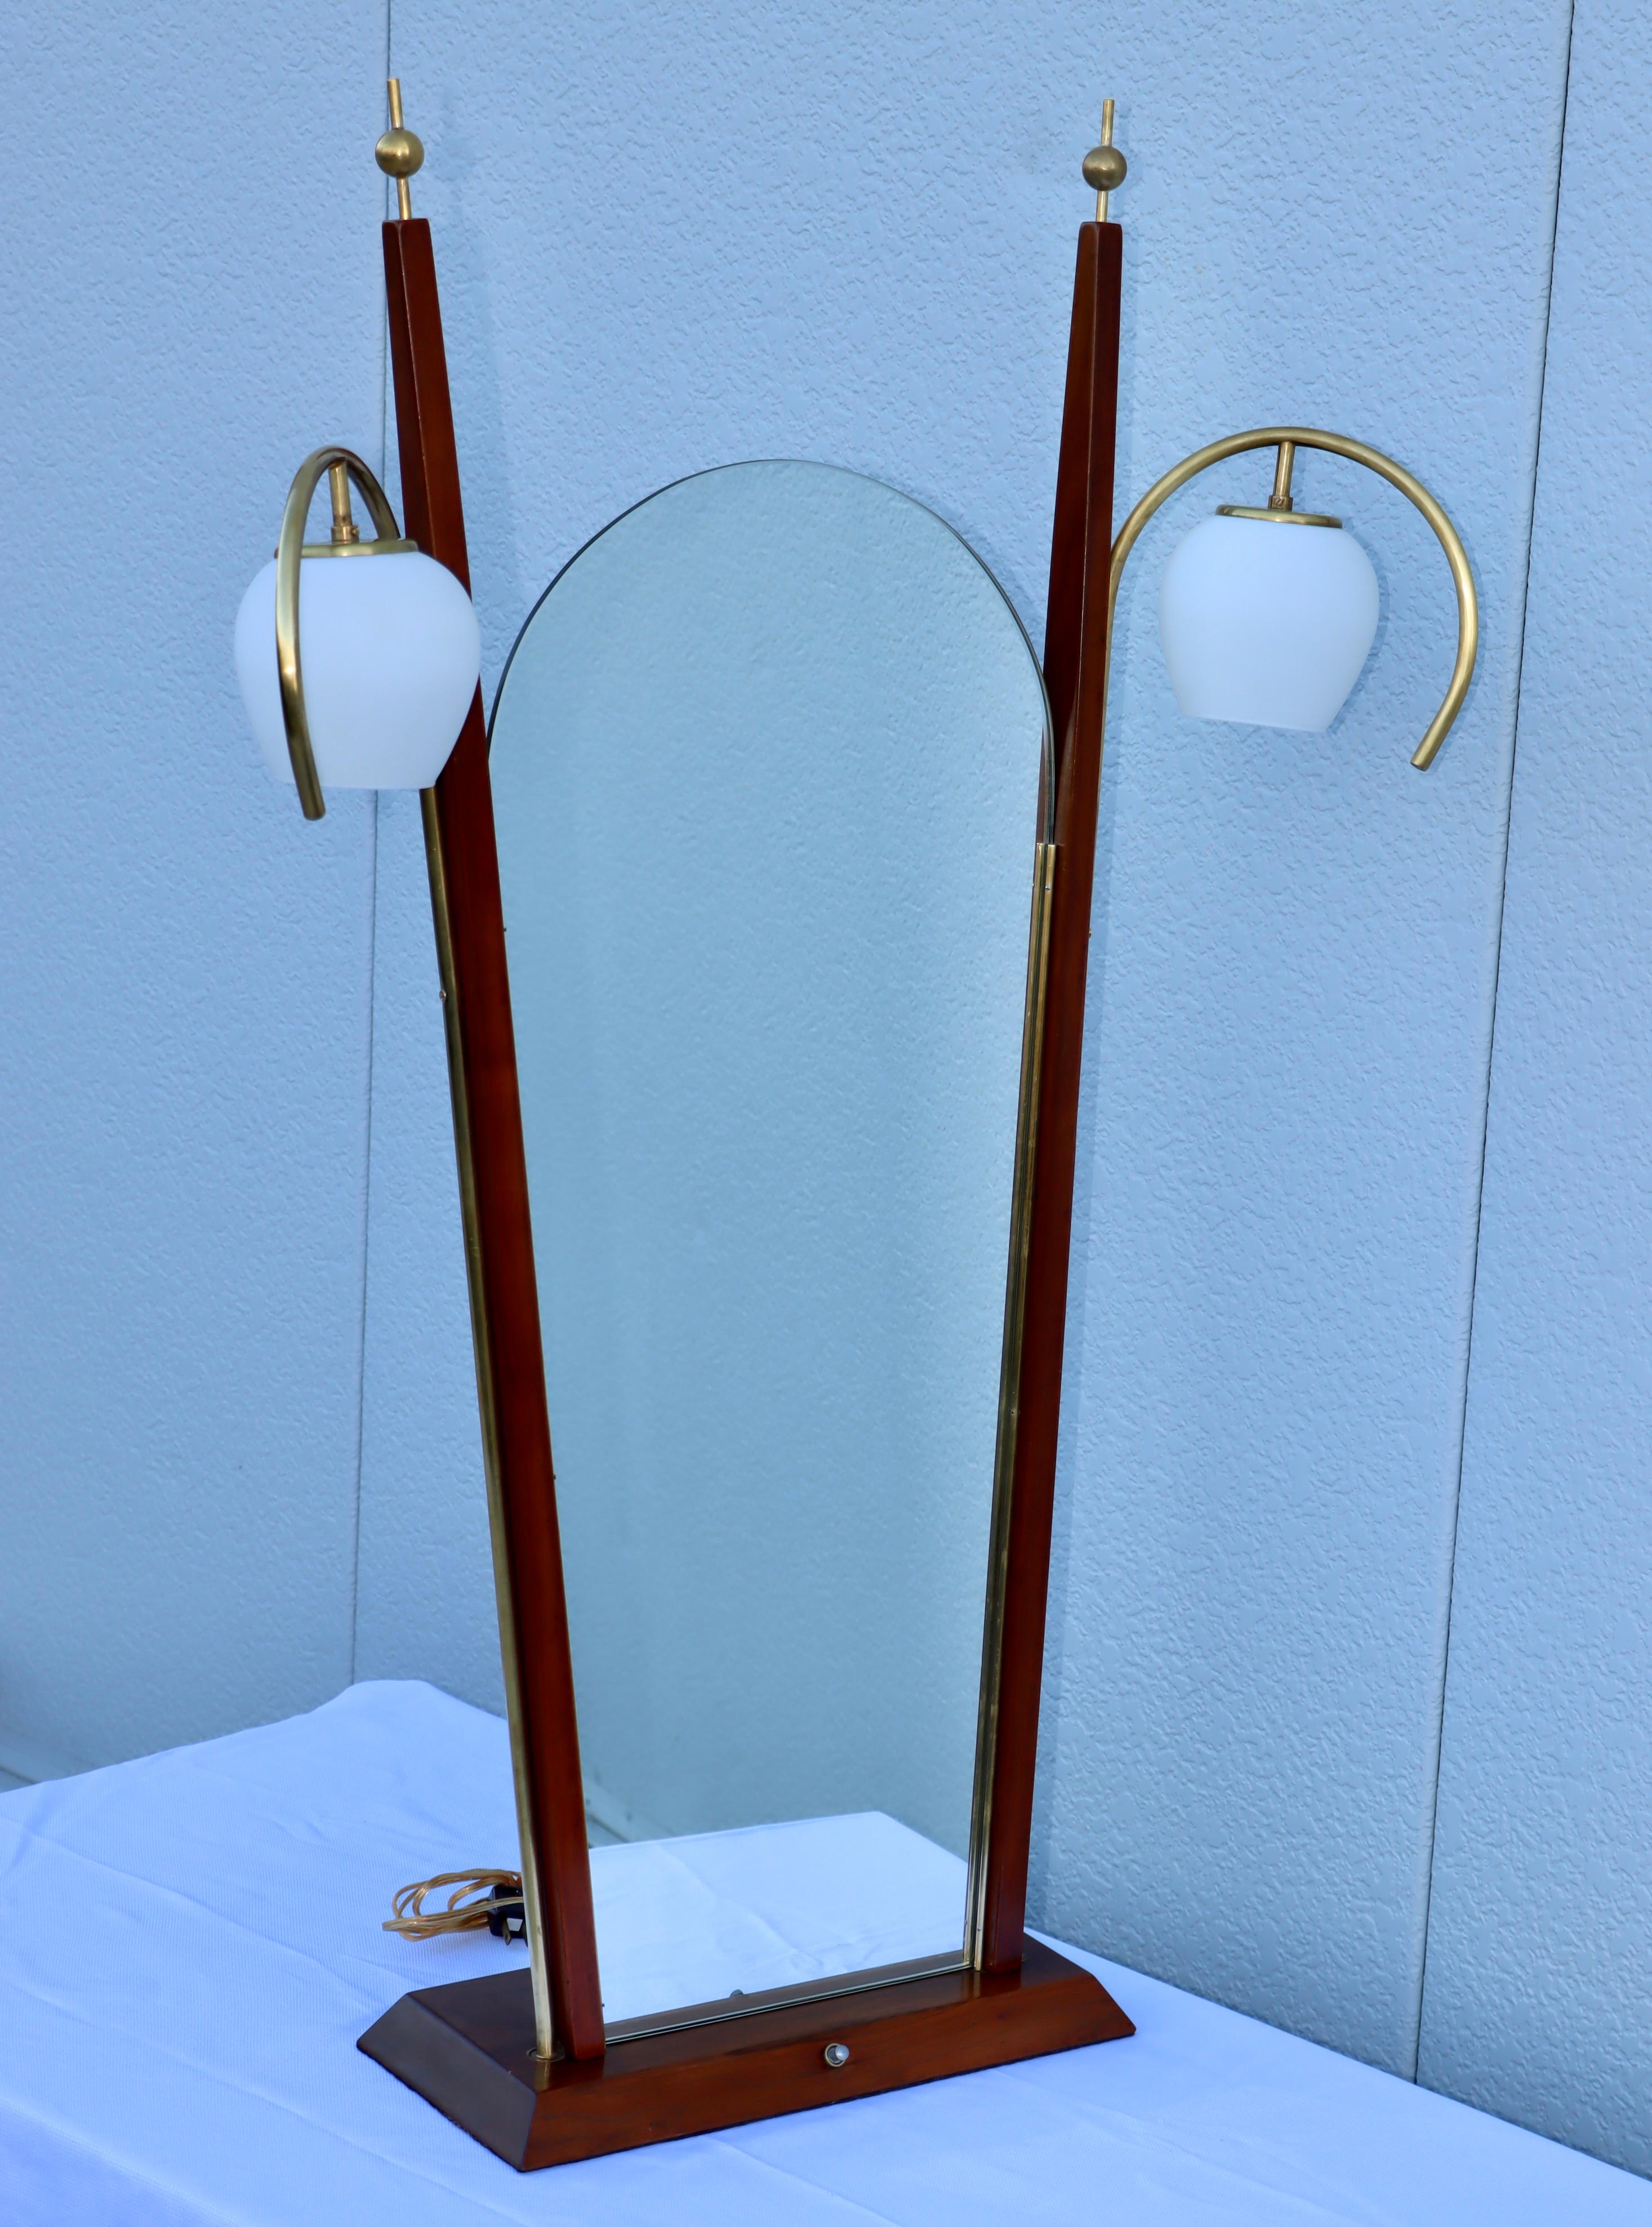 1950s walnut and brass Italian vanity mirror with lights, in vintage condition with minor wear and patina due to age and us, lightly restored and newly rewired.